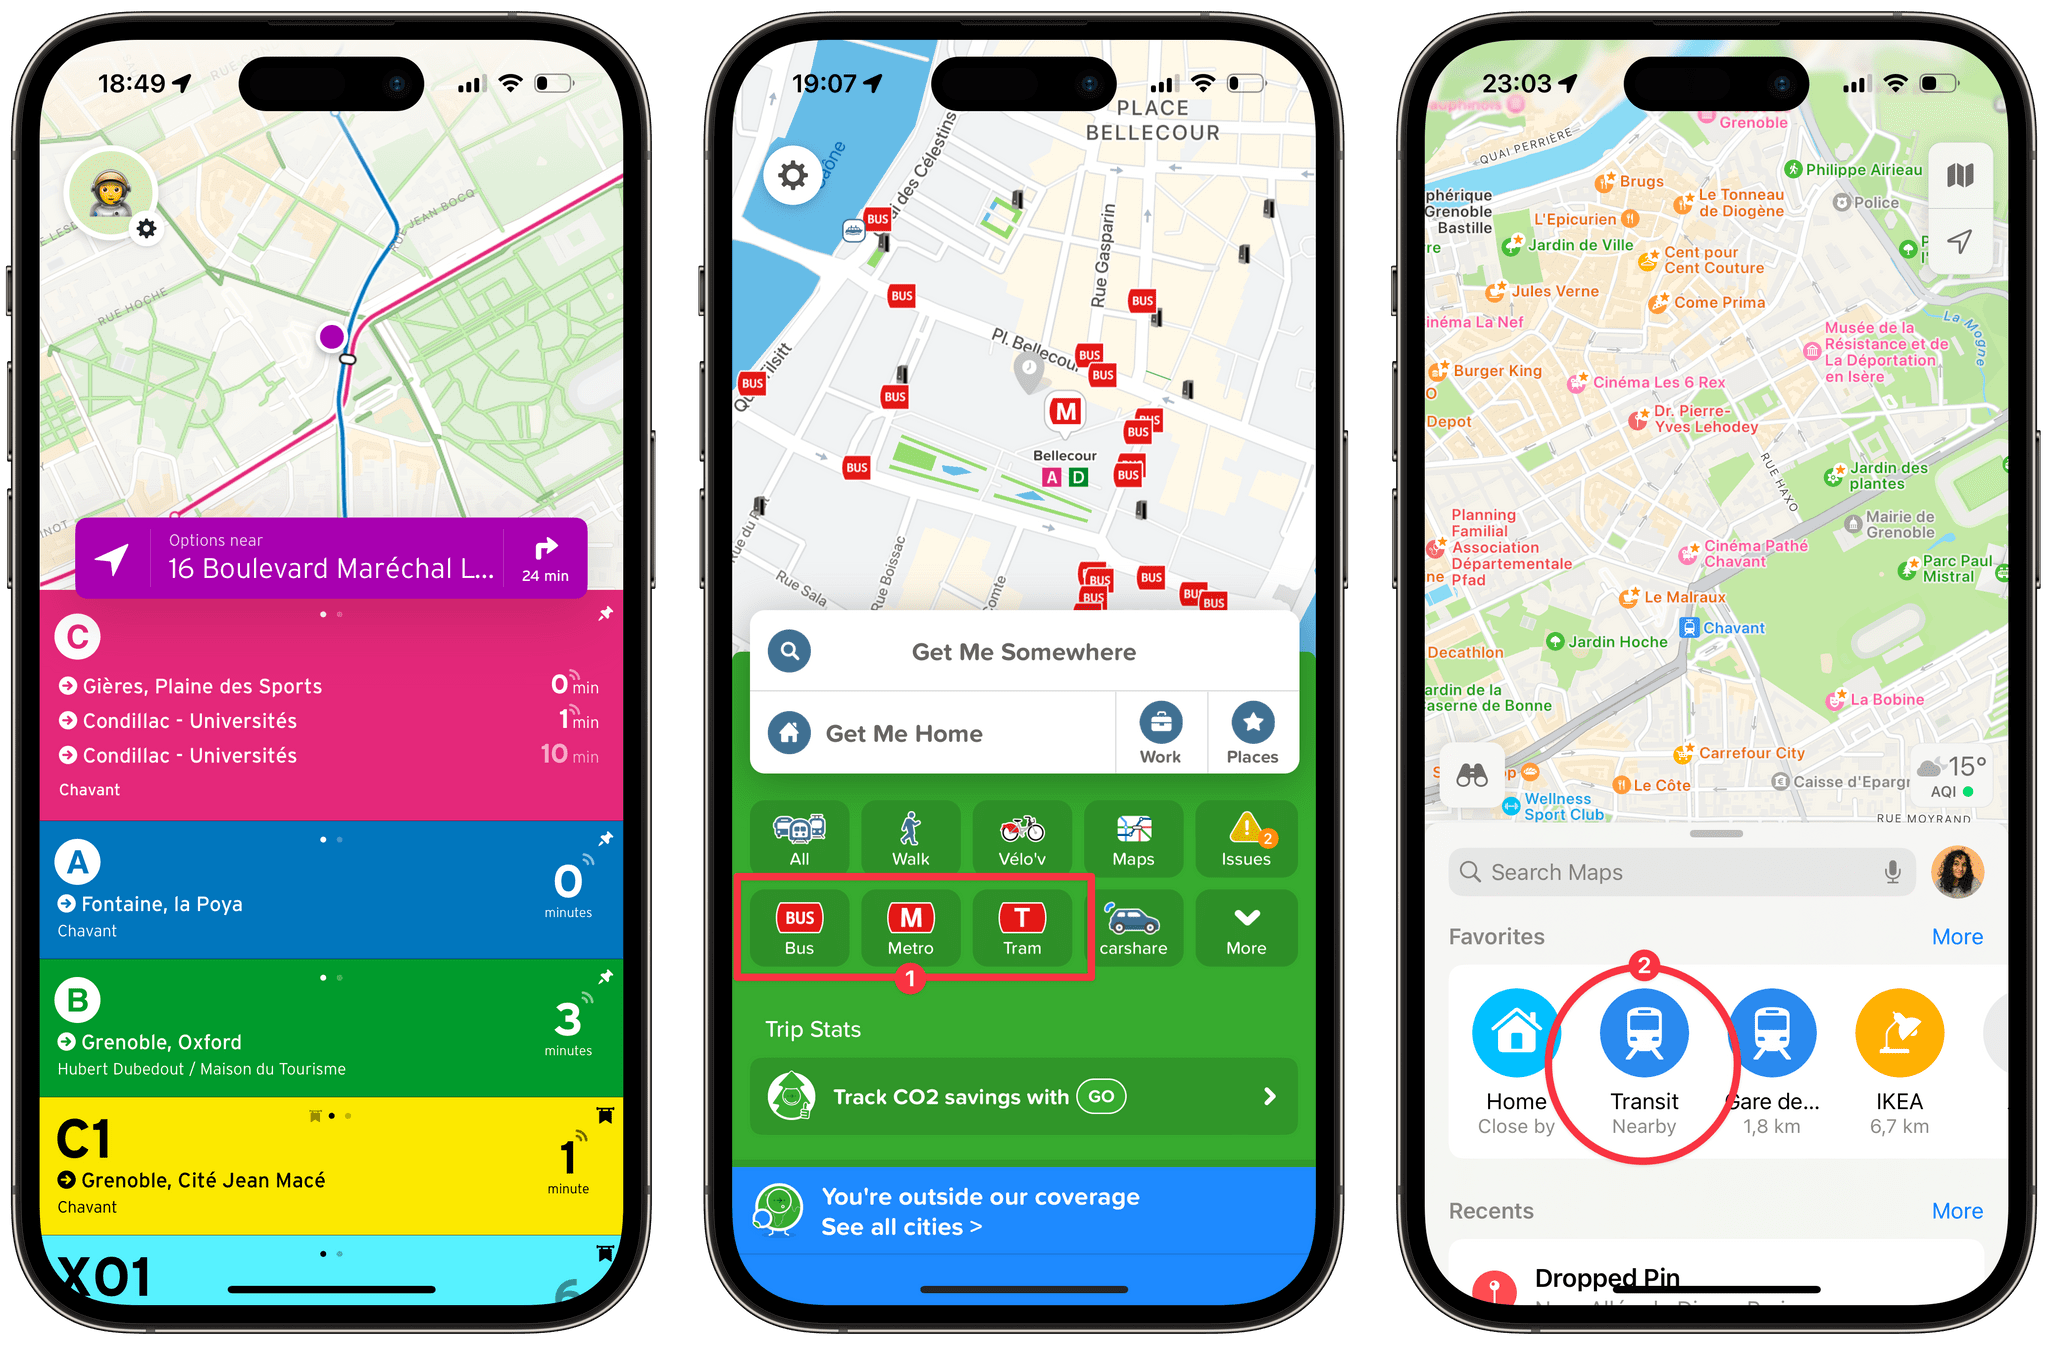 When you open Transit, you immediately get a view of nearby lines with their real-time waiting times. In Citymapper, this information is only available after you select one of the main 'Bus,' 'Metro,' or Tram' buttons (1). In Apple Maps, it's hidden behind a 'Transit Nearby' button (2).